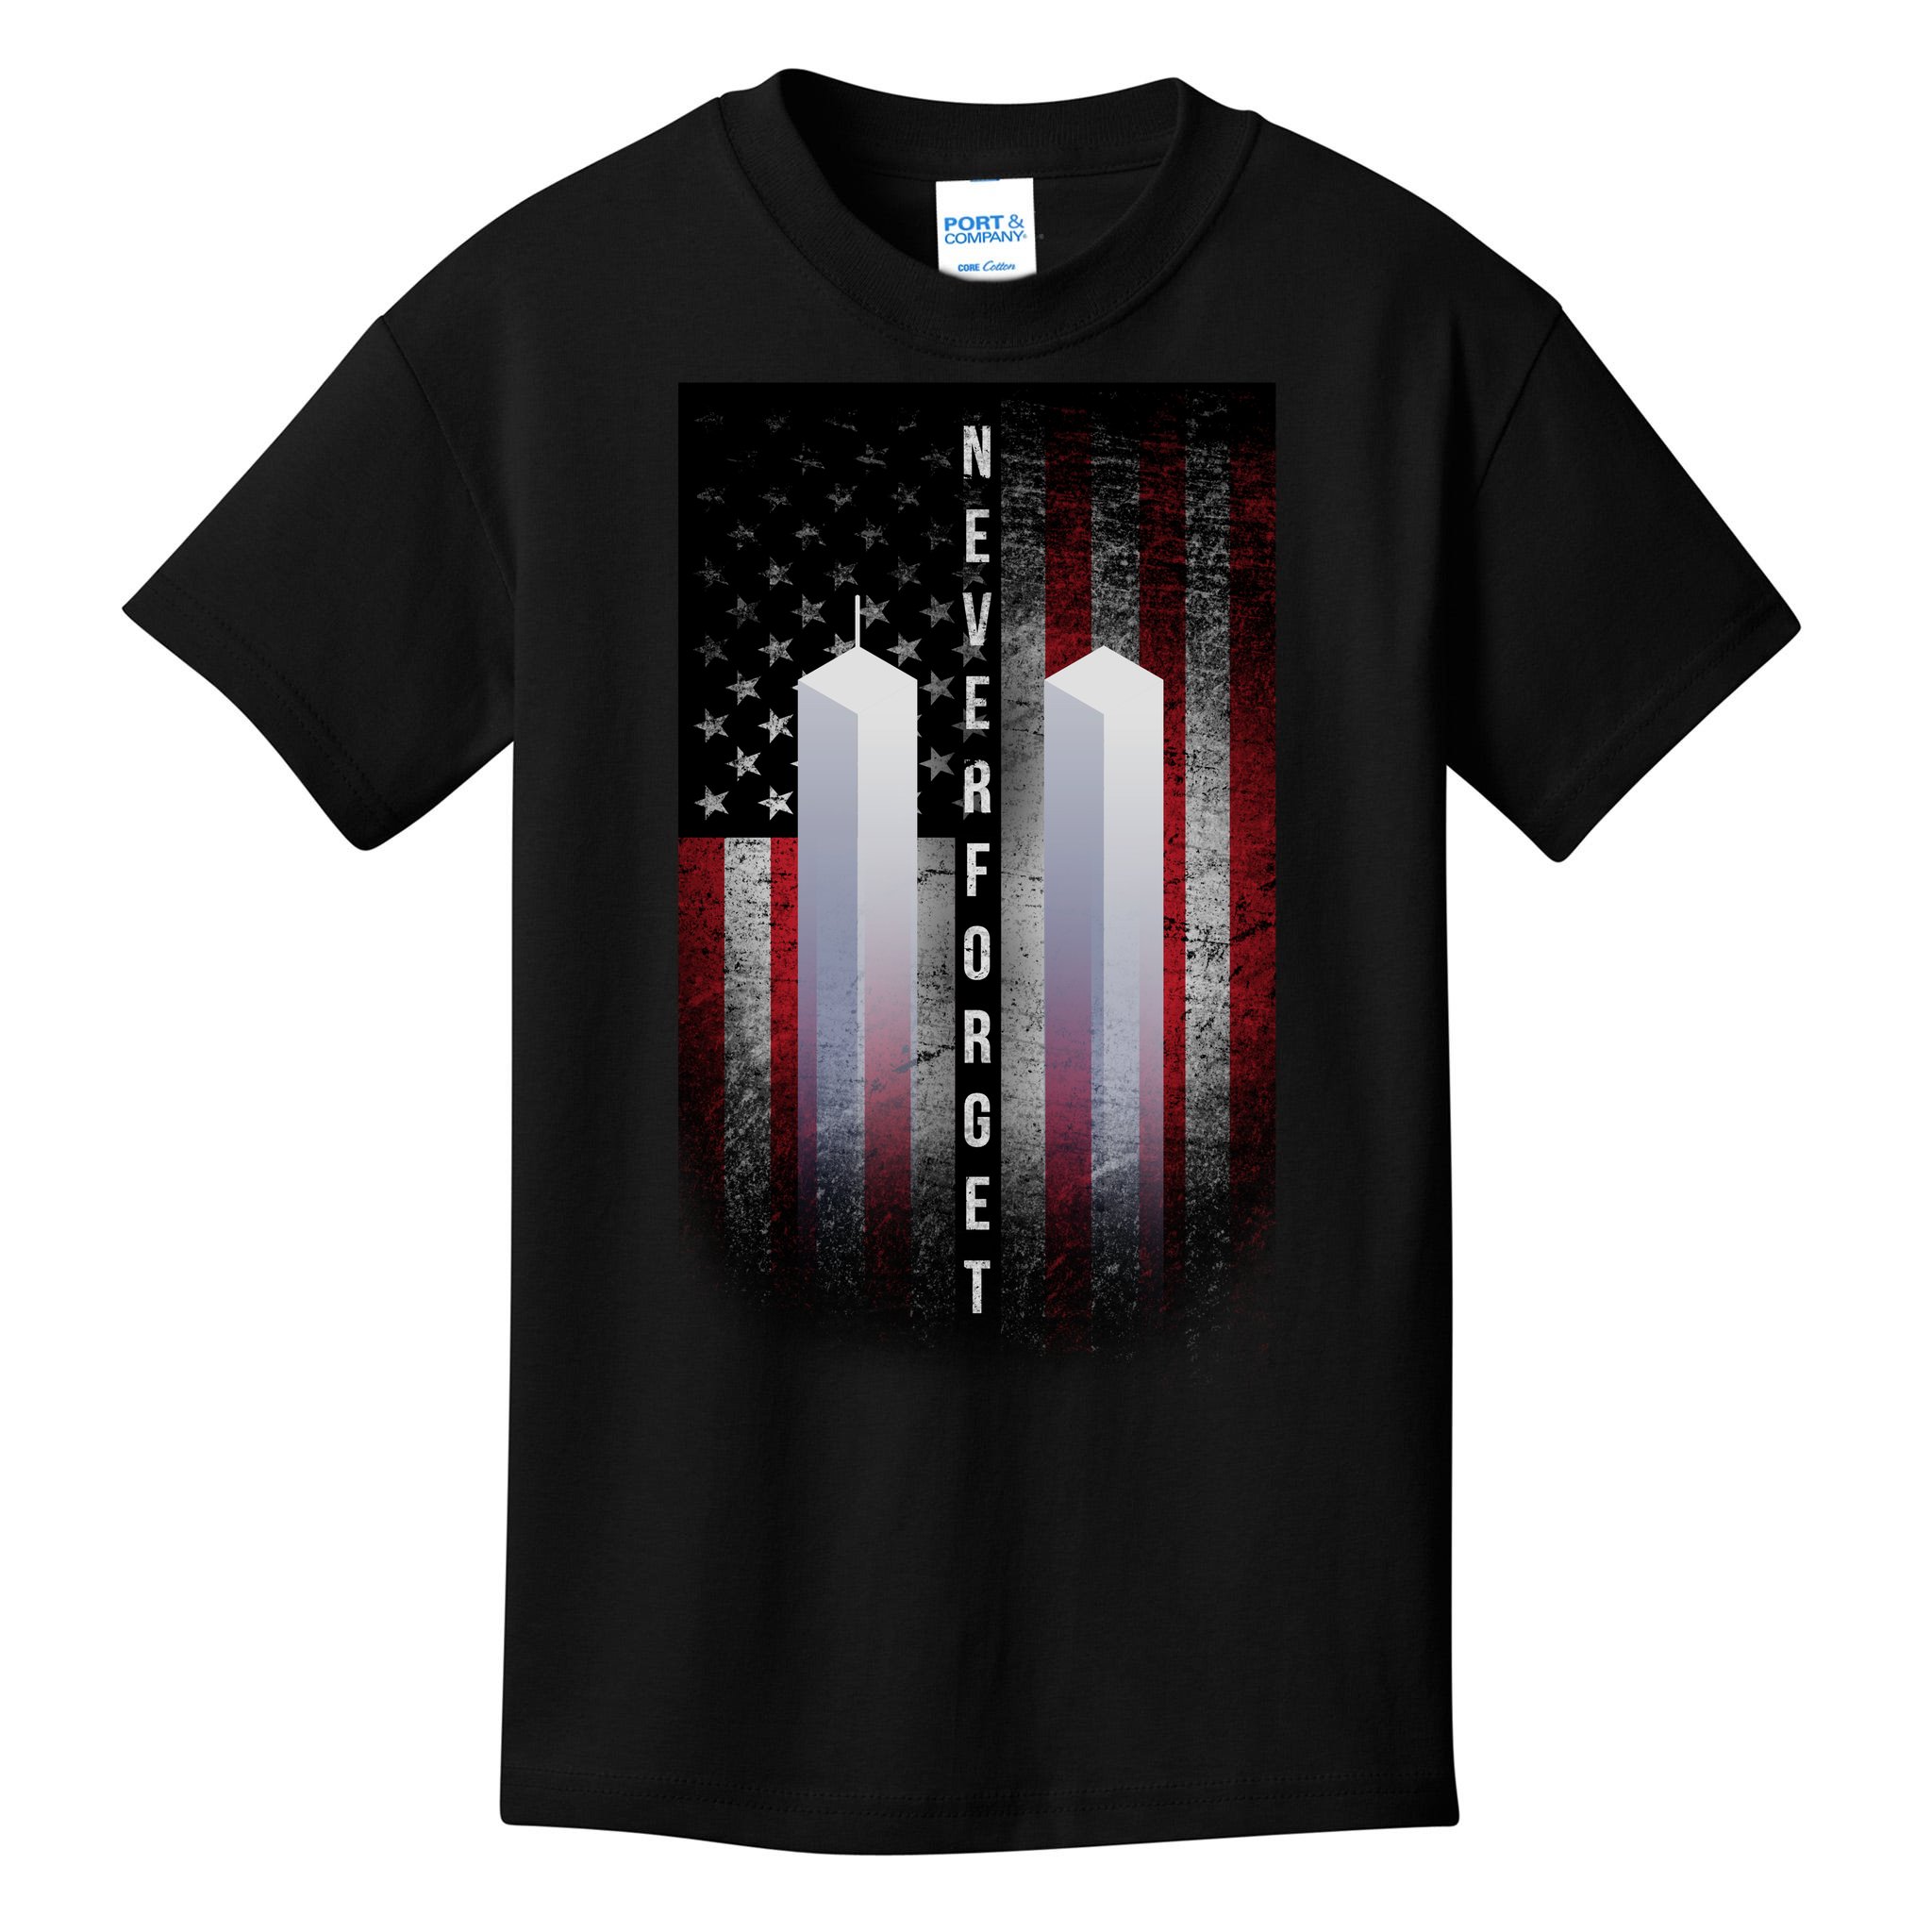 Design nike twin towers 911 attacks shirt, hoodie, sweater and